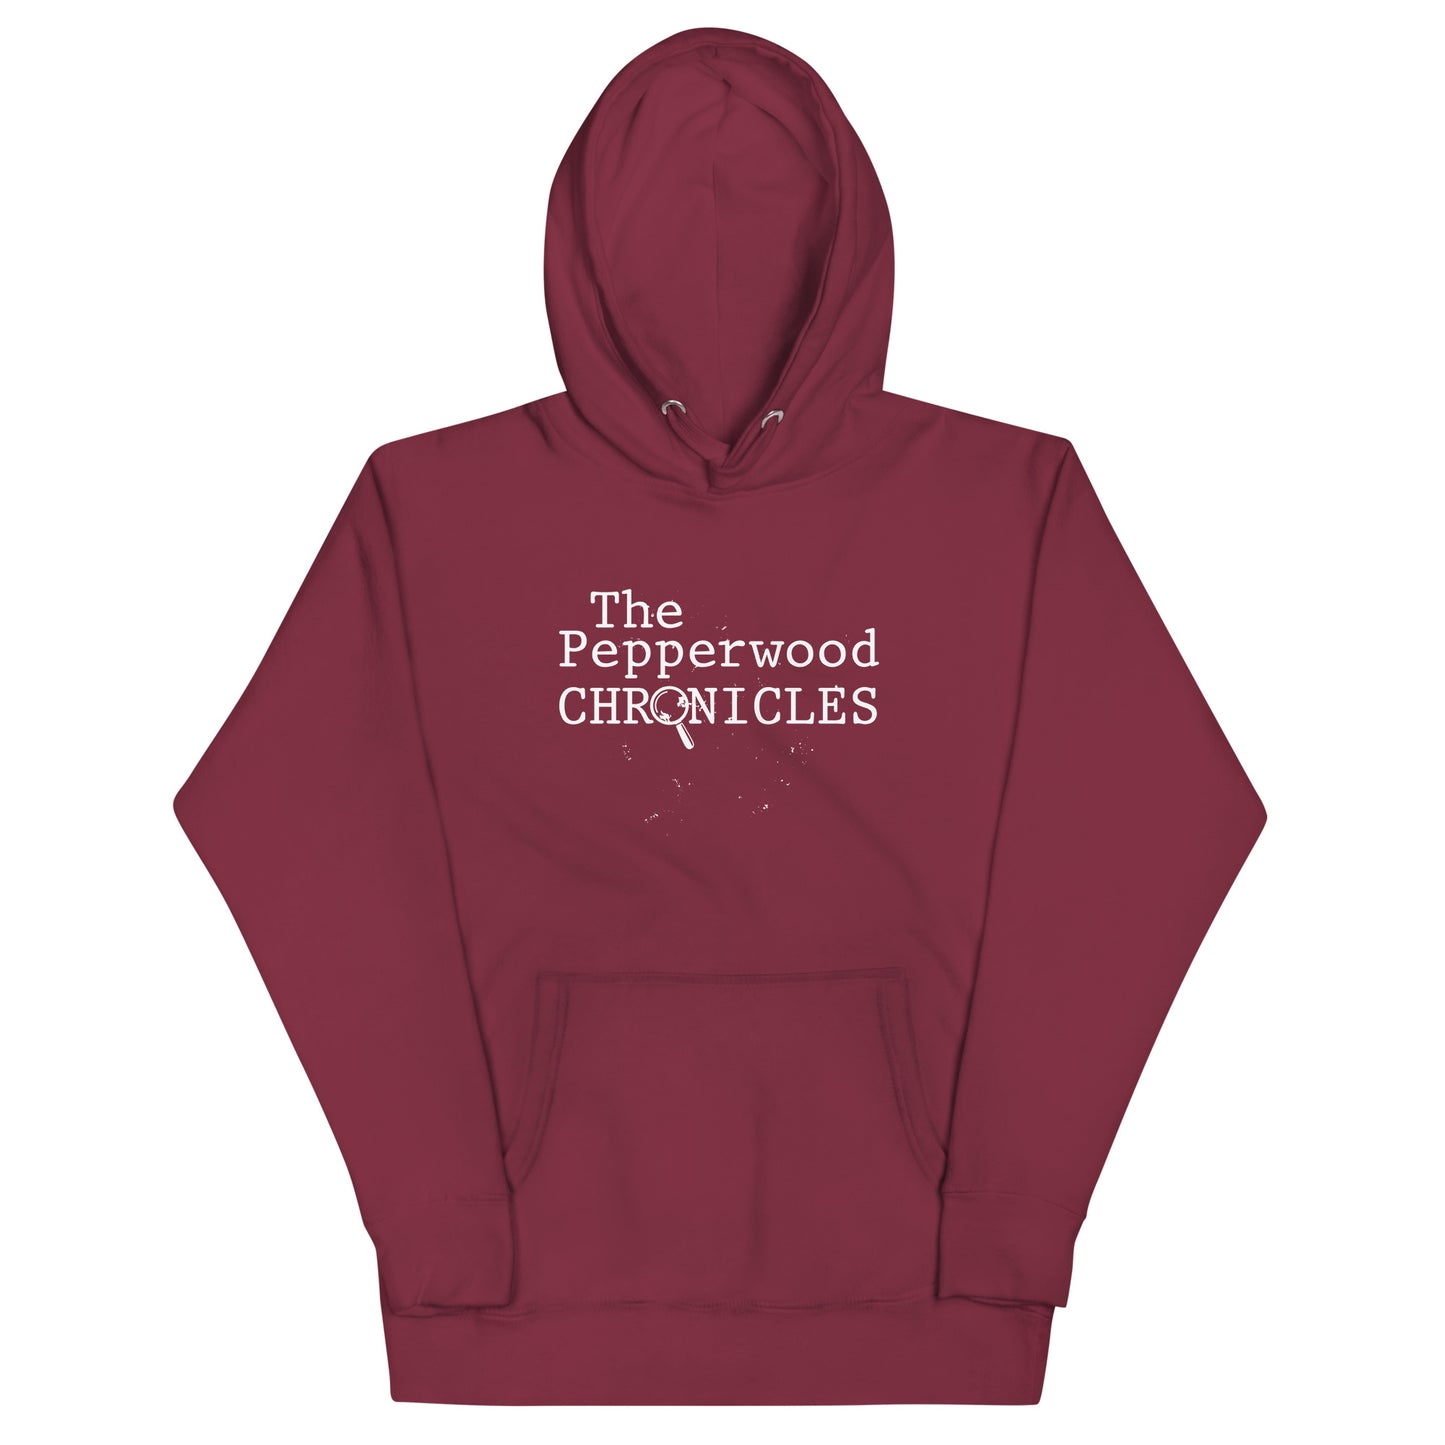 The Pepperwood Chronicles Unisex Hoodie